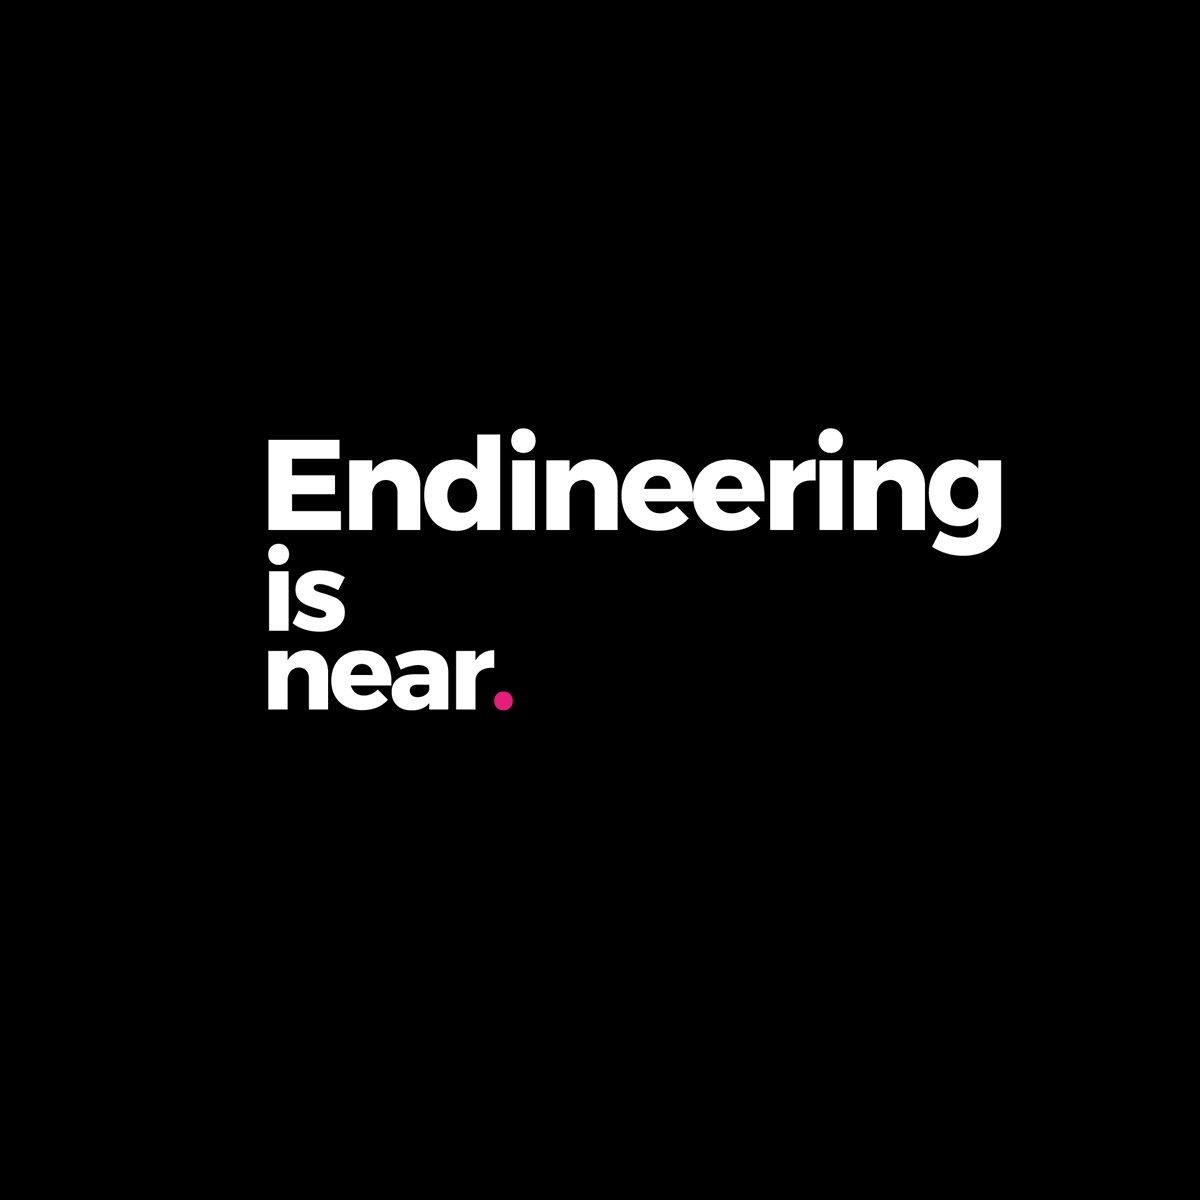 Sick of creating endless products earth doesn’t need? Become an Endineer and Design Ends. Starts January 30th. 4 wks. 2hrs per week. Online. Ondemand learn.endineering.co/courses/endine… #Design #DesignEnds #CX #UX #Circularity #Data #CustomerExperience